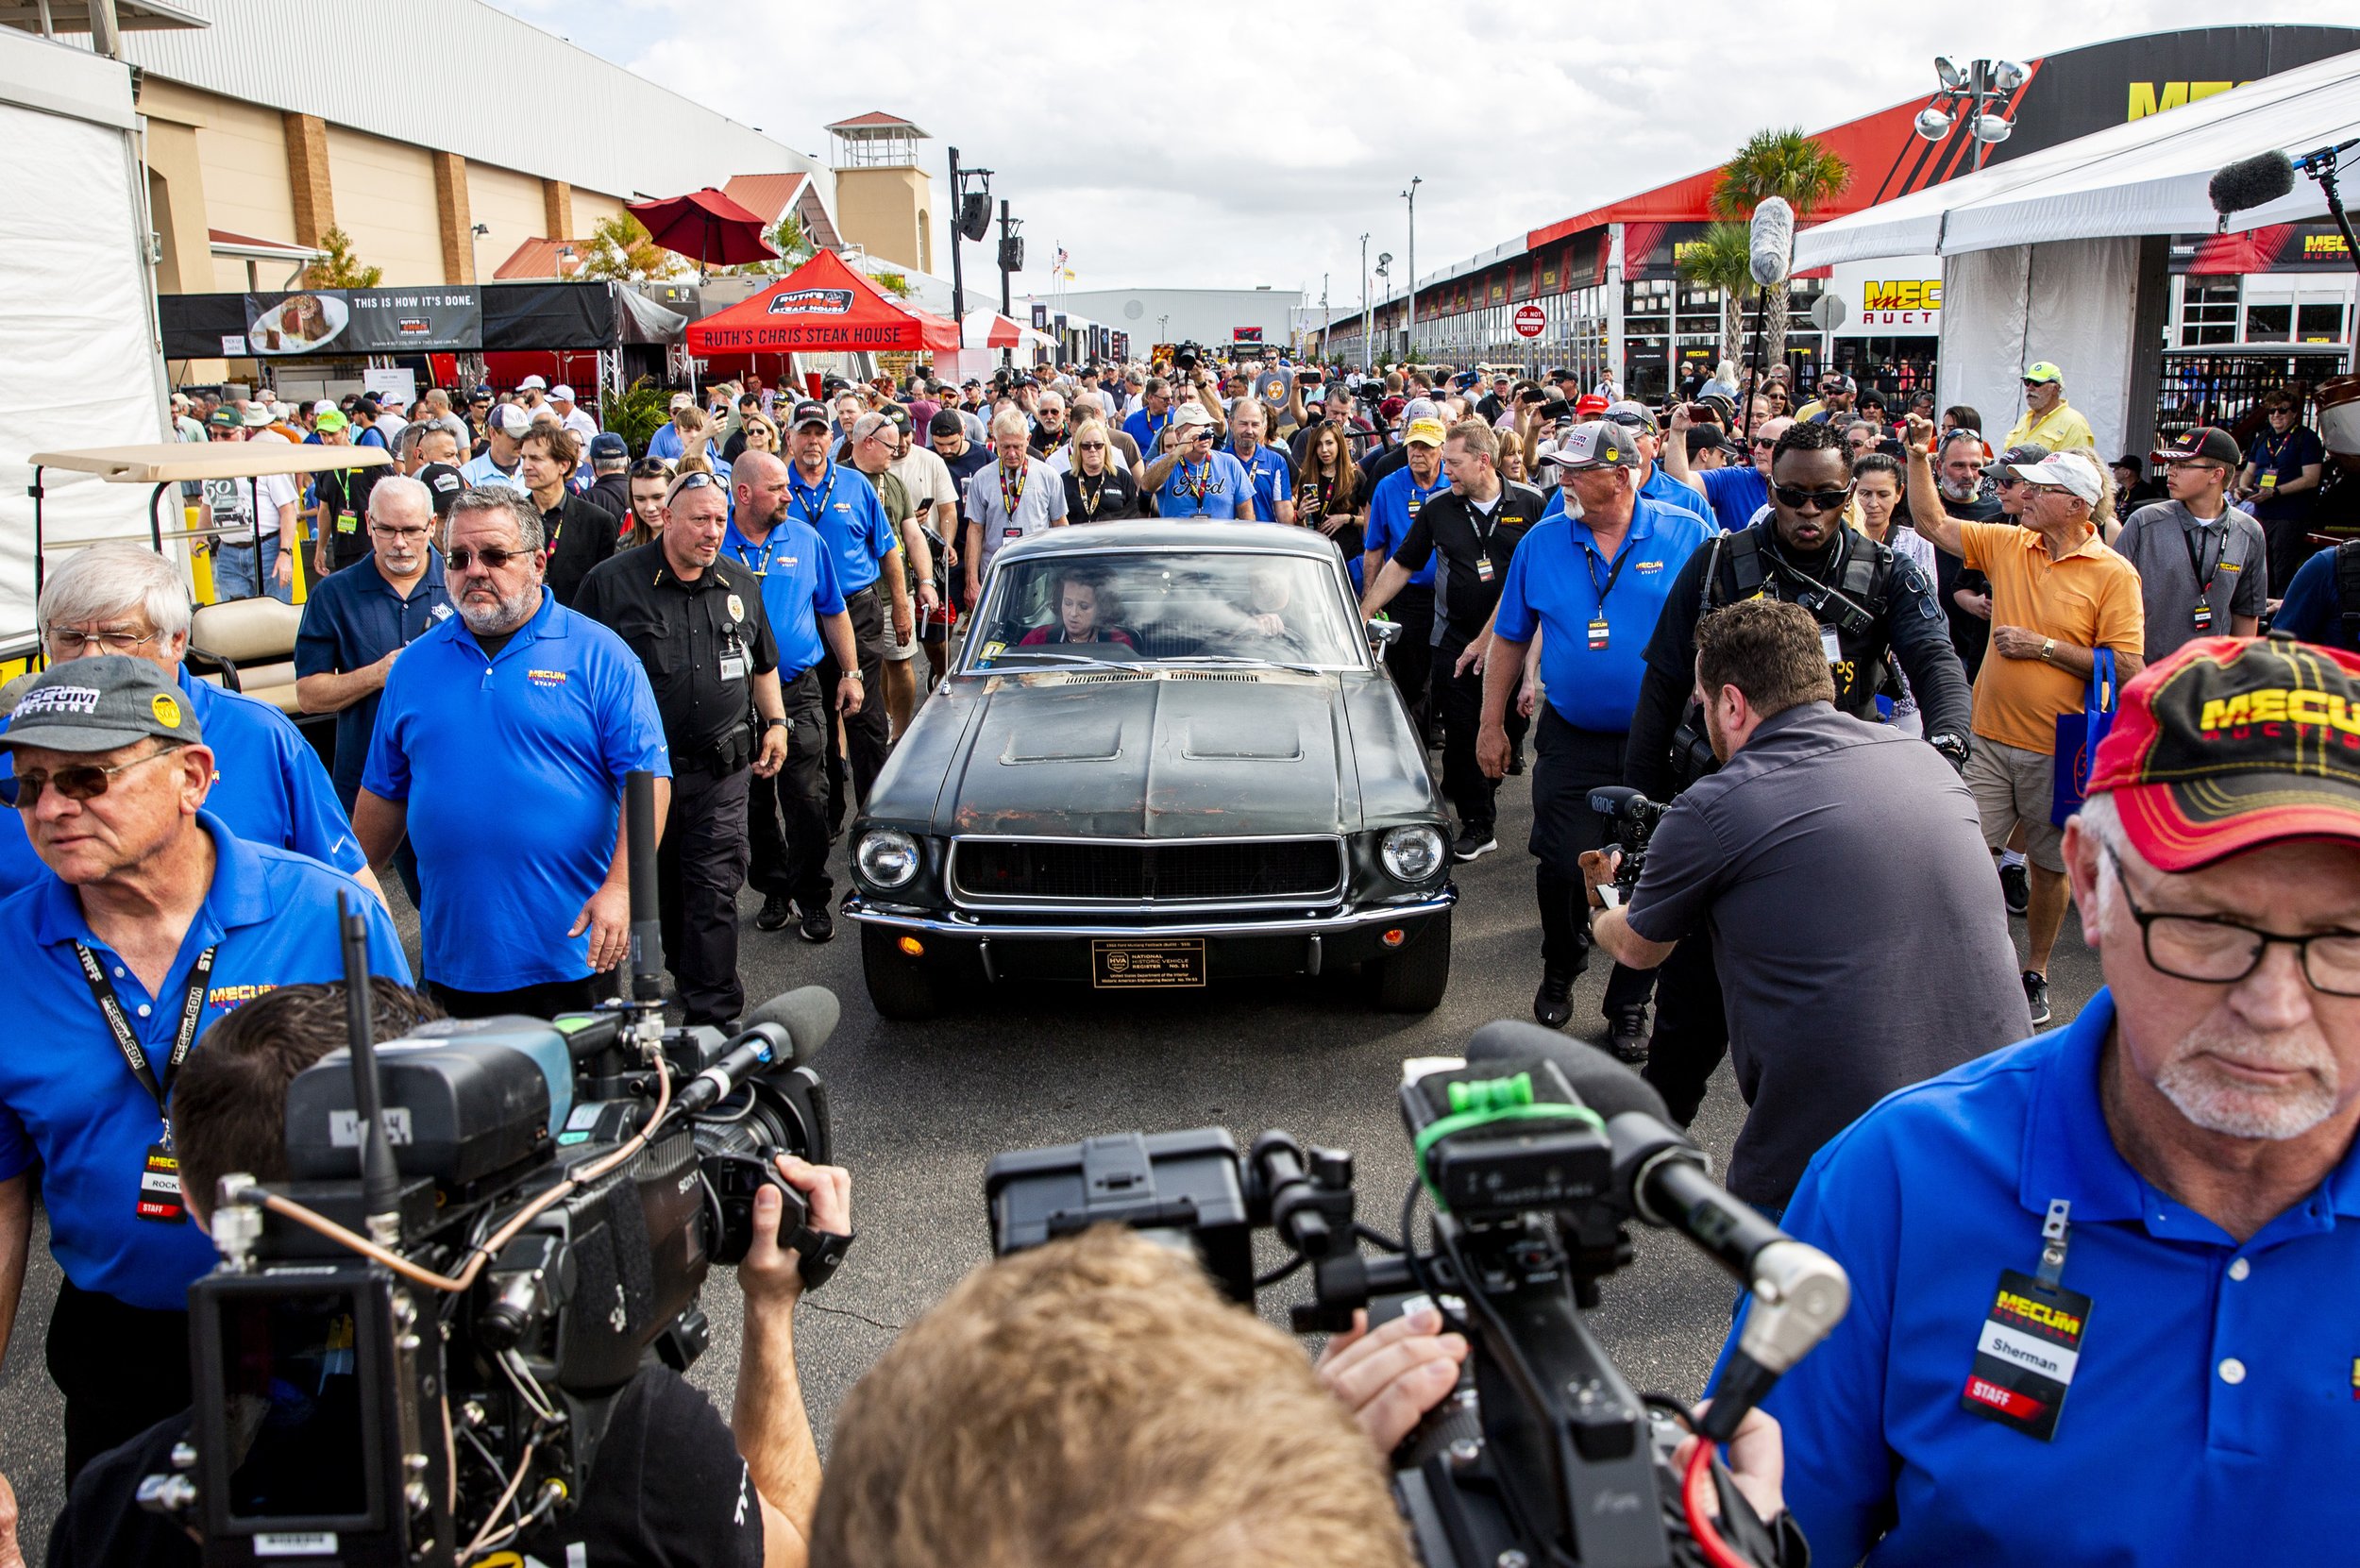  People surround the 1968 "Bullitt" Mustang GT car, Friday, Jan 10, 2020, in Kissimmee, Fla. The iconic Highland Green 1968 Mustang GT that once made history for its appearance in the film “Bullitt” is now making history again. It fetched $3.74 milli